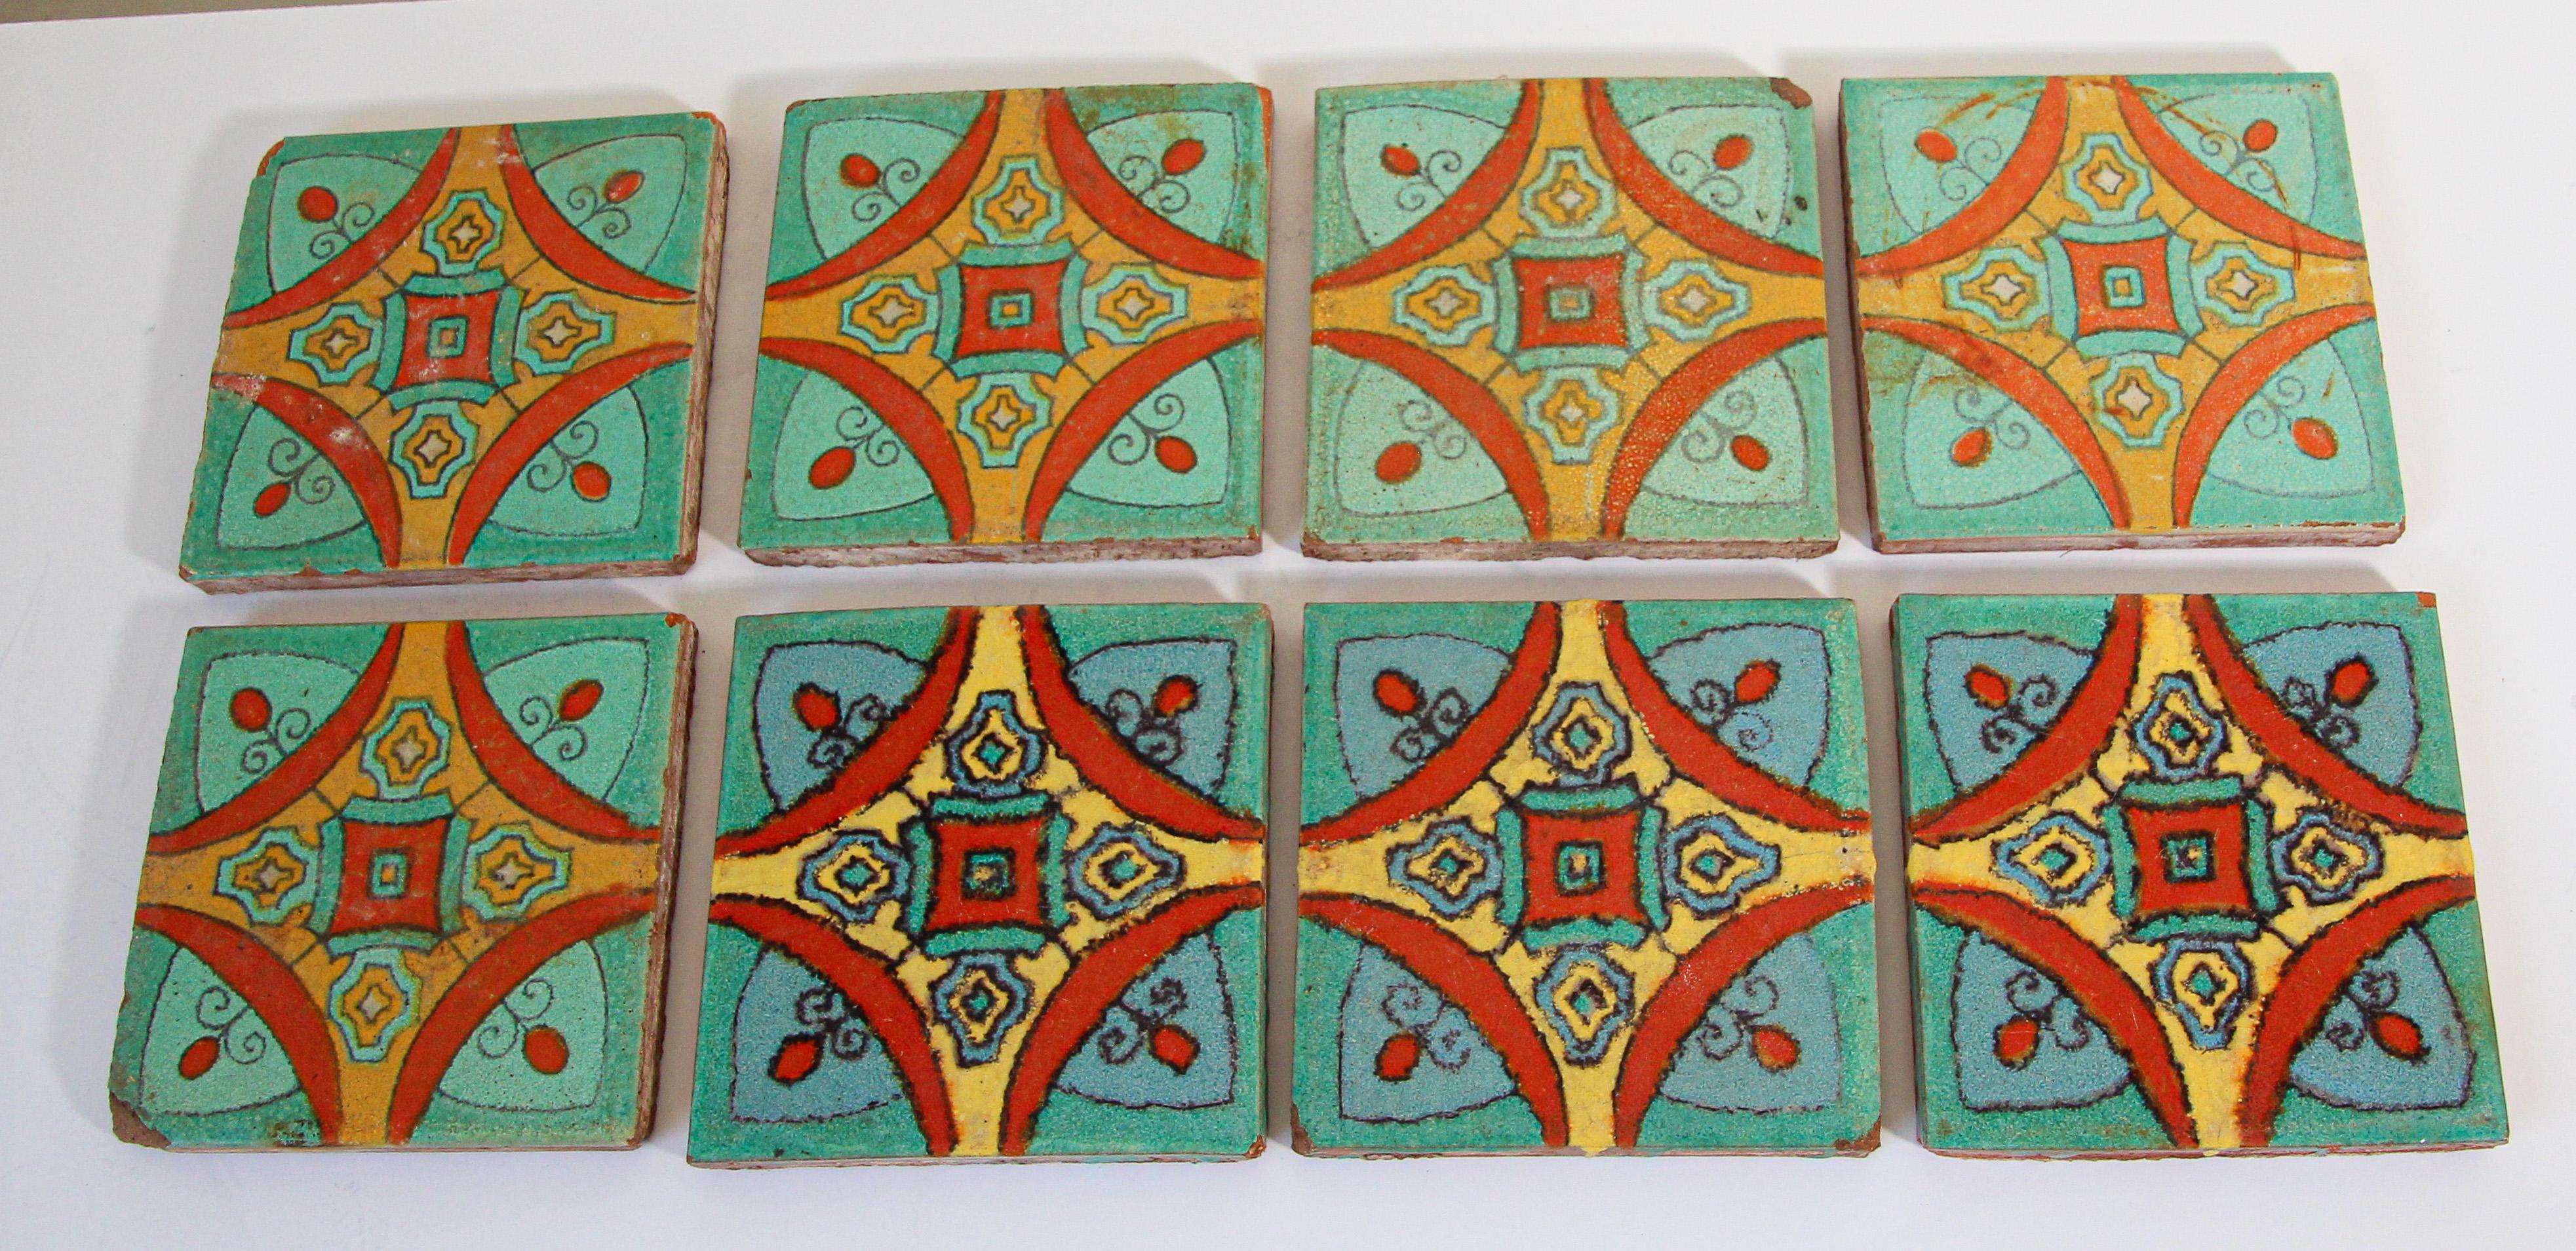 Vintage Spanish Talavera ceramic hand painted tiles, handcrafted and kiln fired set of eight tiles.
Hand made Spanish Talavera wall tiles.
Size each: 6